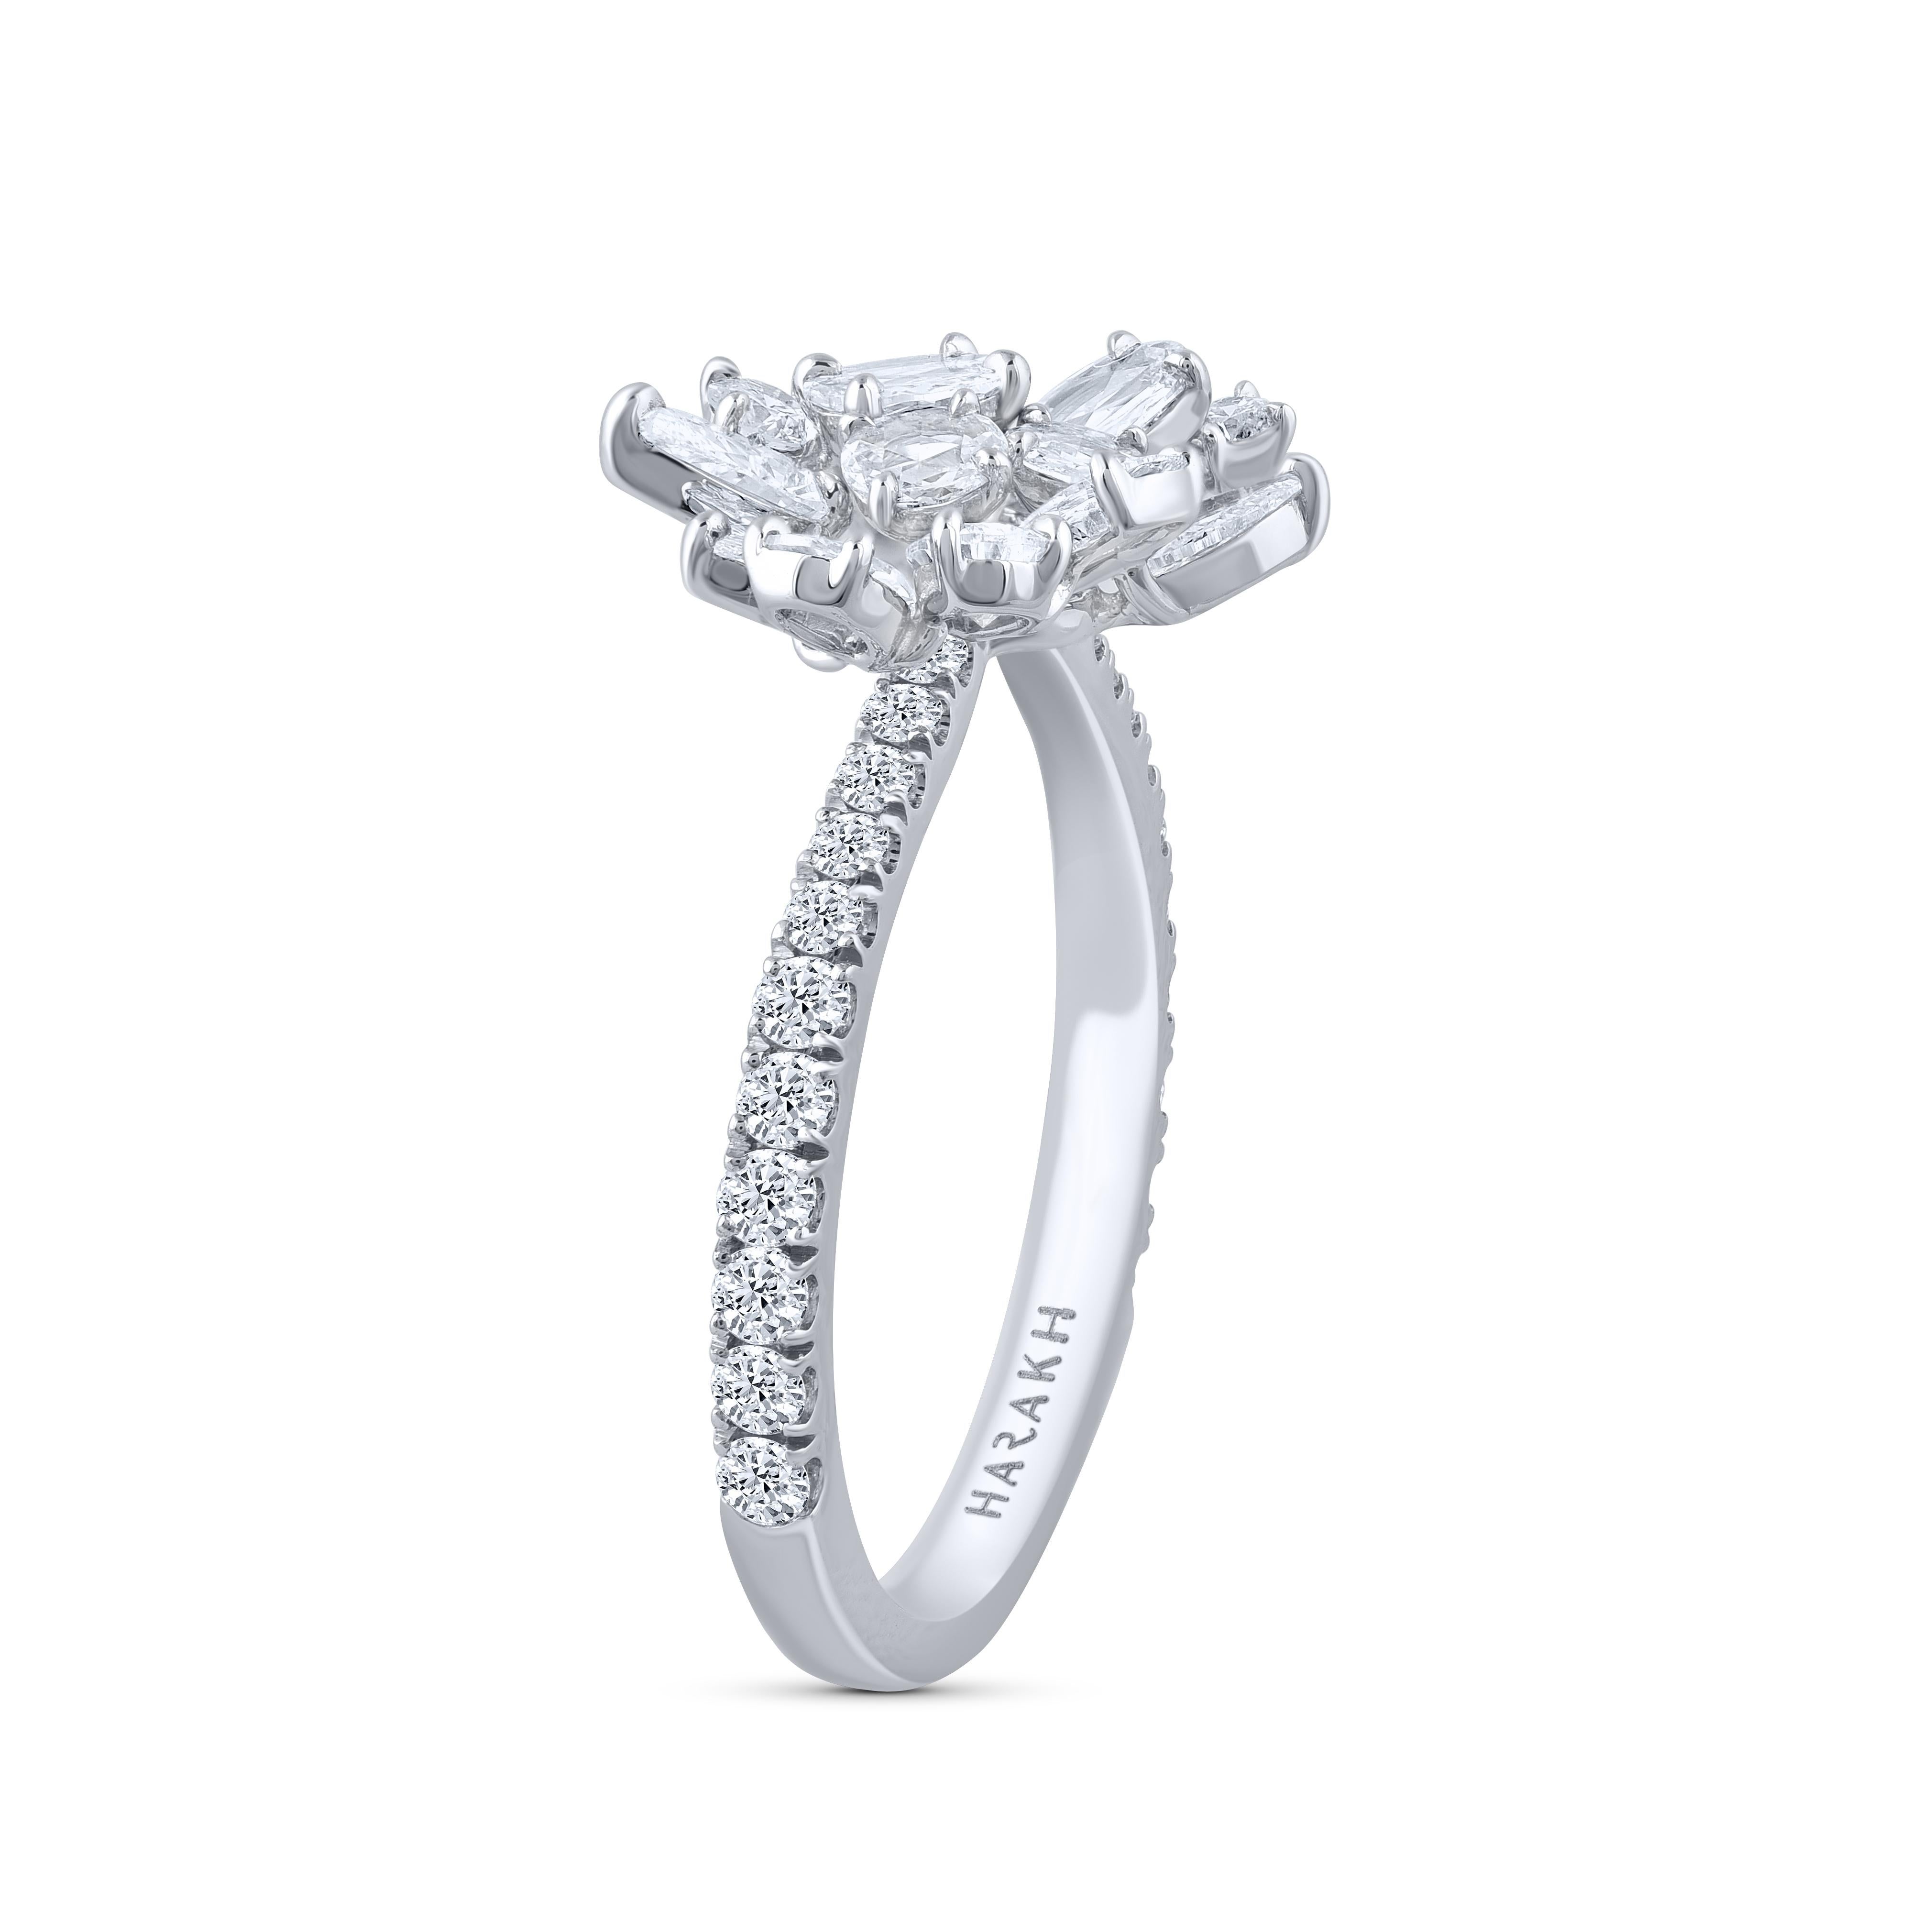 Elegantly designed cluster ring with a white gold band studded with brilliant cut diamonds and topped by a cluster of multi stones, beautifully crafted in 18 KT white gold. 

From the Cascade collection, this ring is studded with 37 D-F color, IF-VS